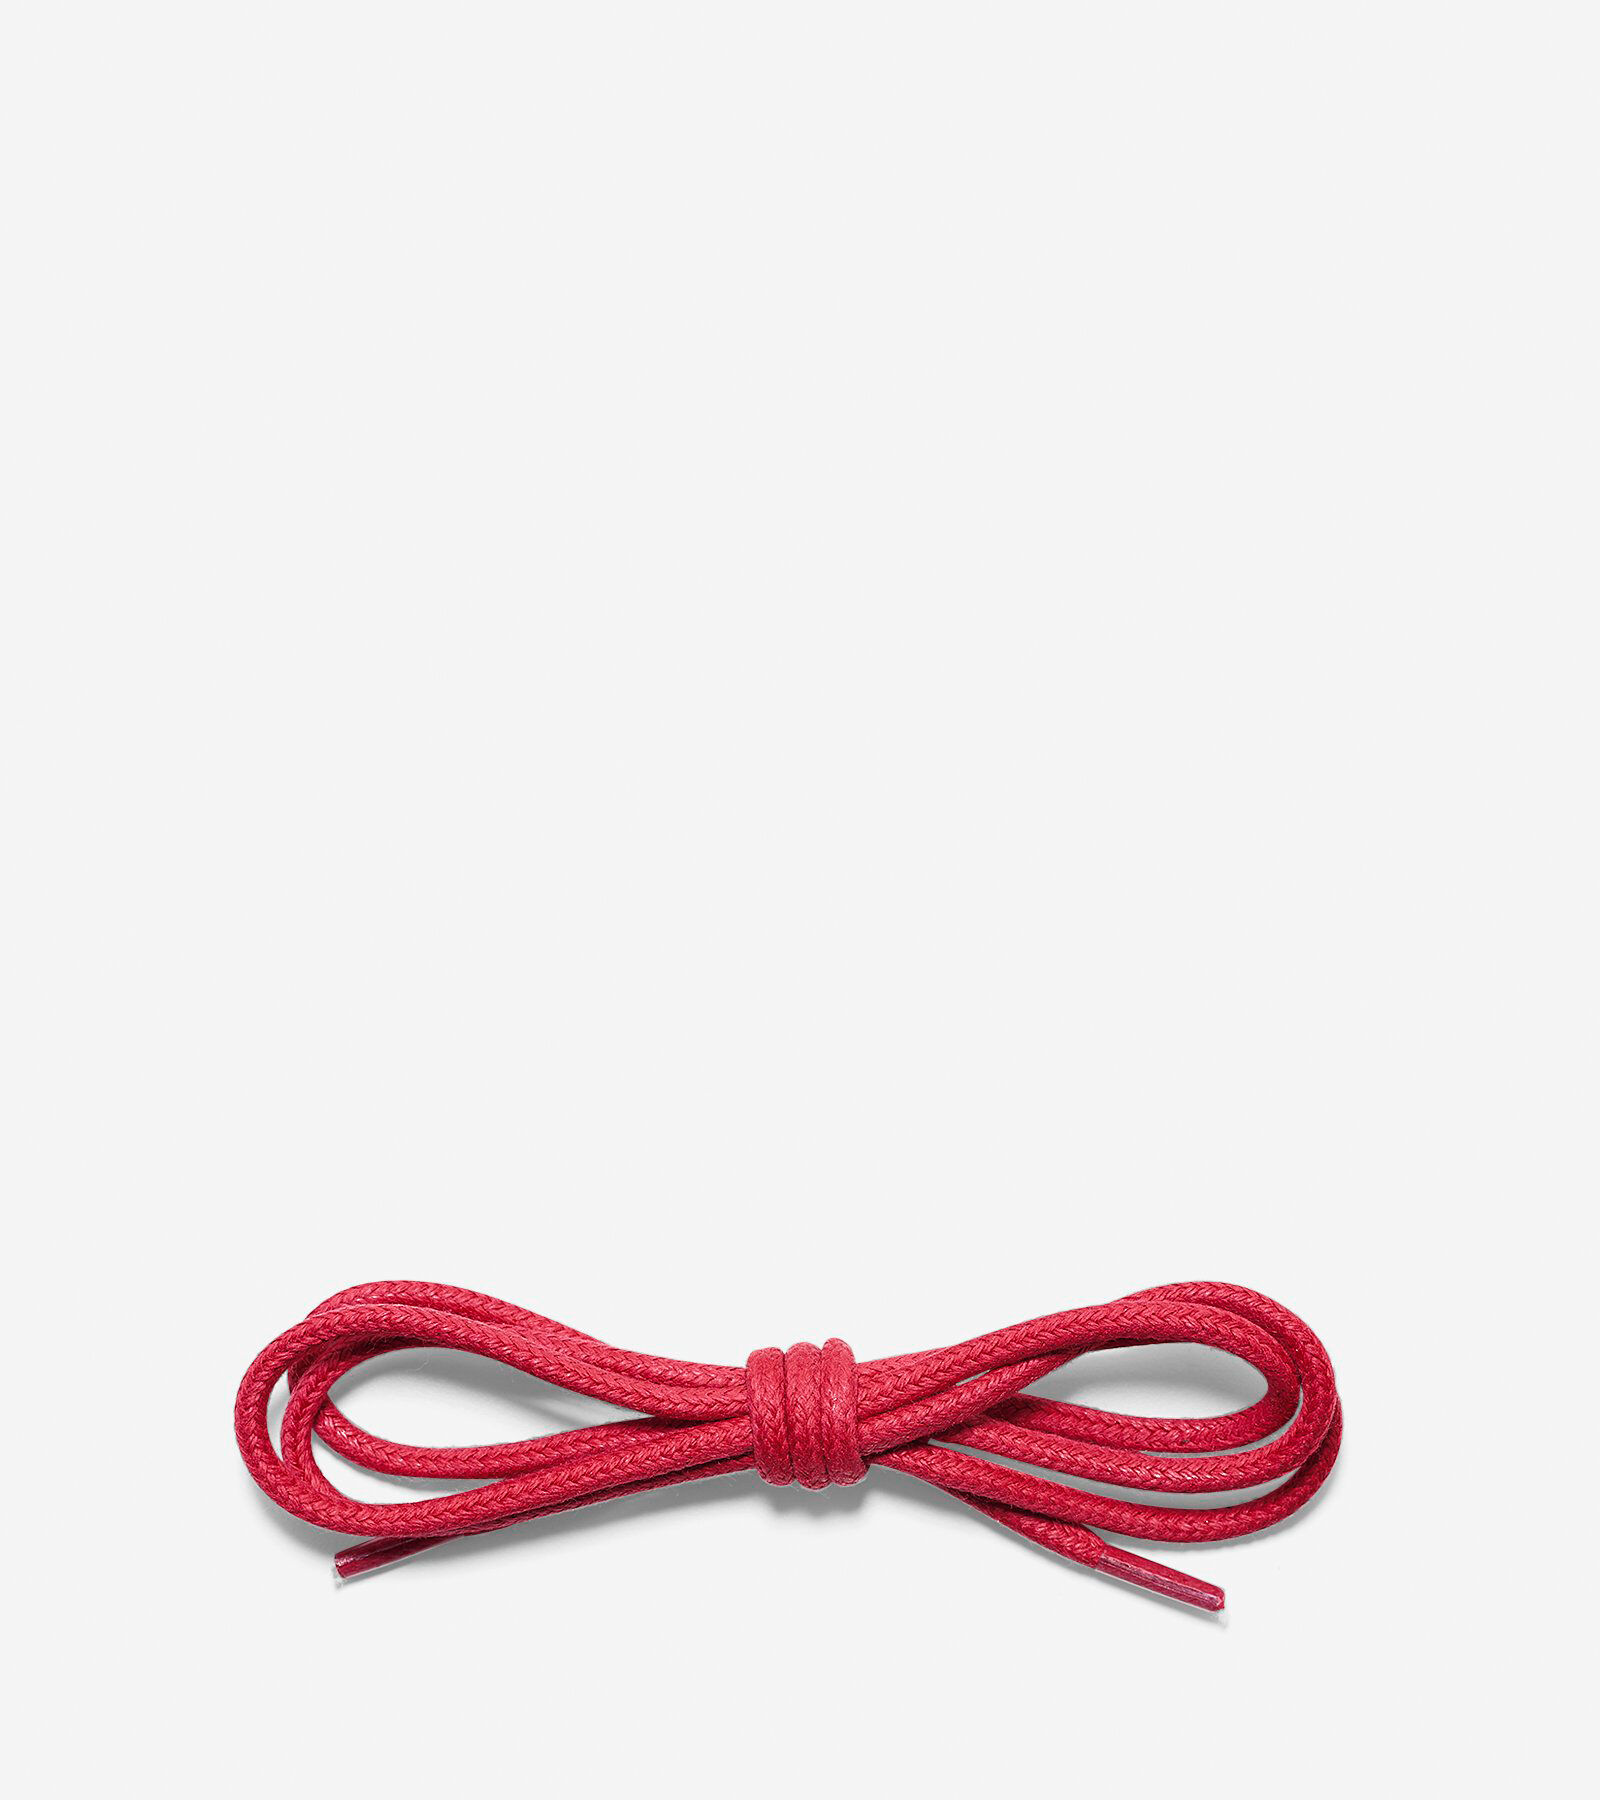 Mens Round Shoe Laces in Sunset Red 